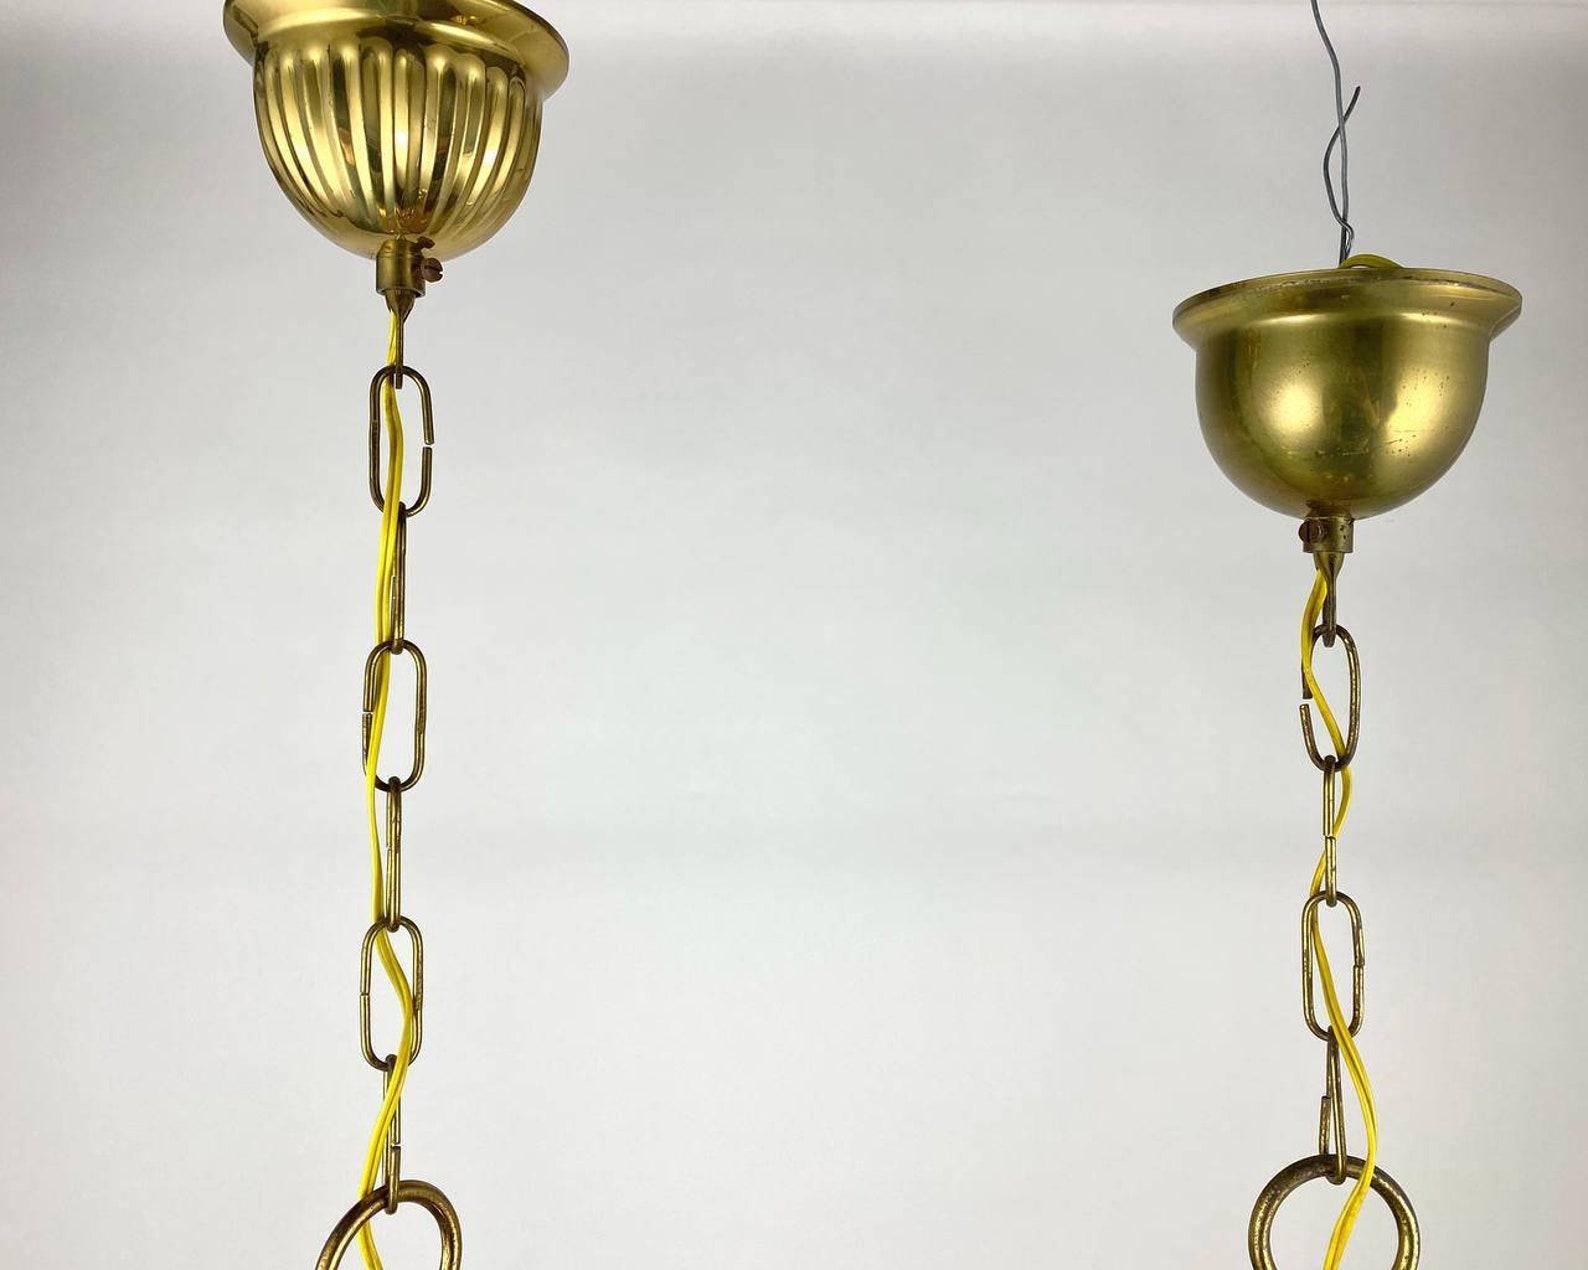 Vintage Ceiling Lamp or Lantern Gilt Brass and Textured Glass Suspention In Excellent Condition For Sale In Bastogne, BE